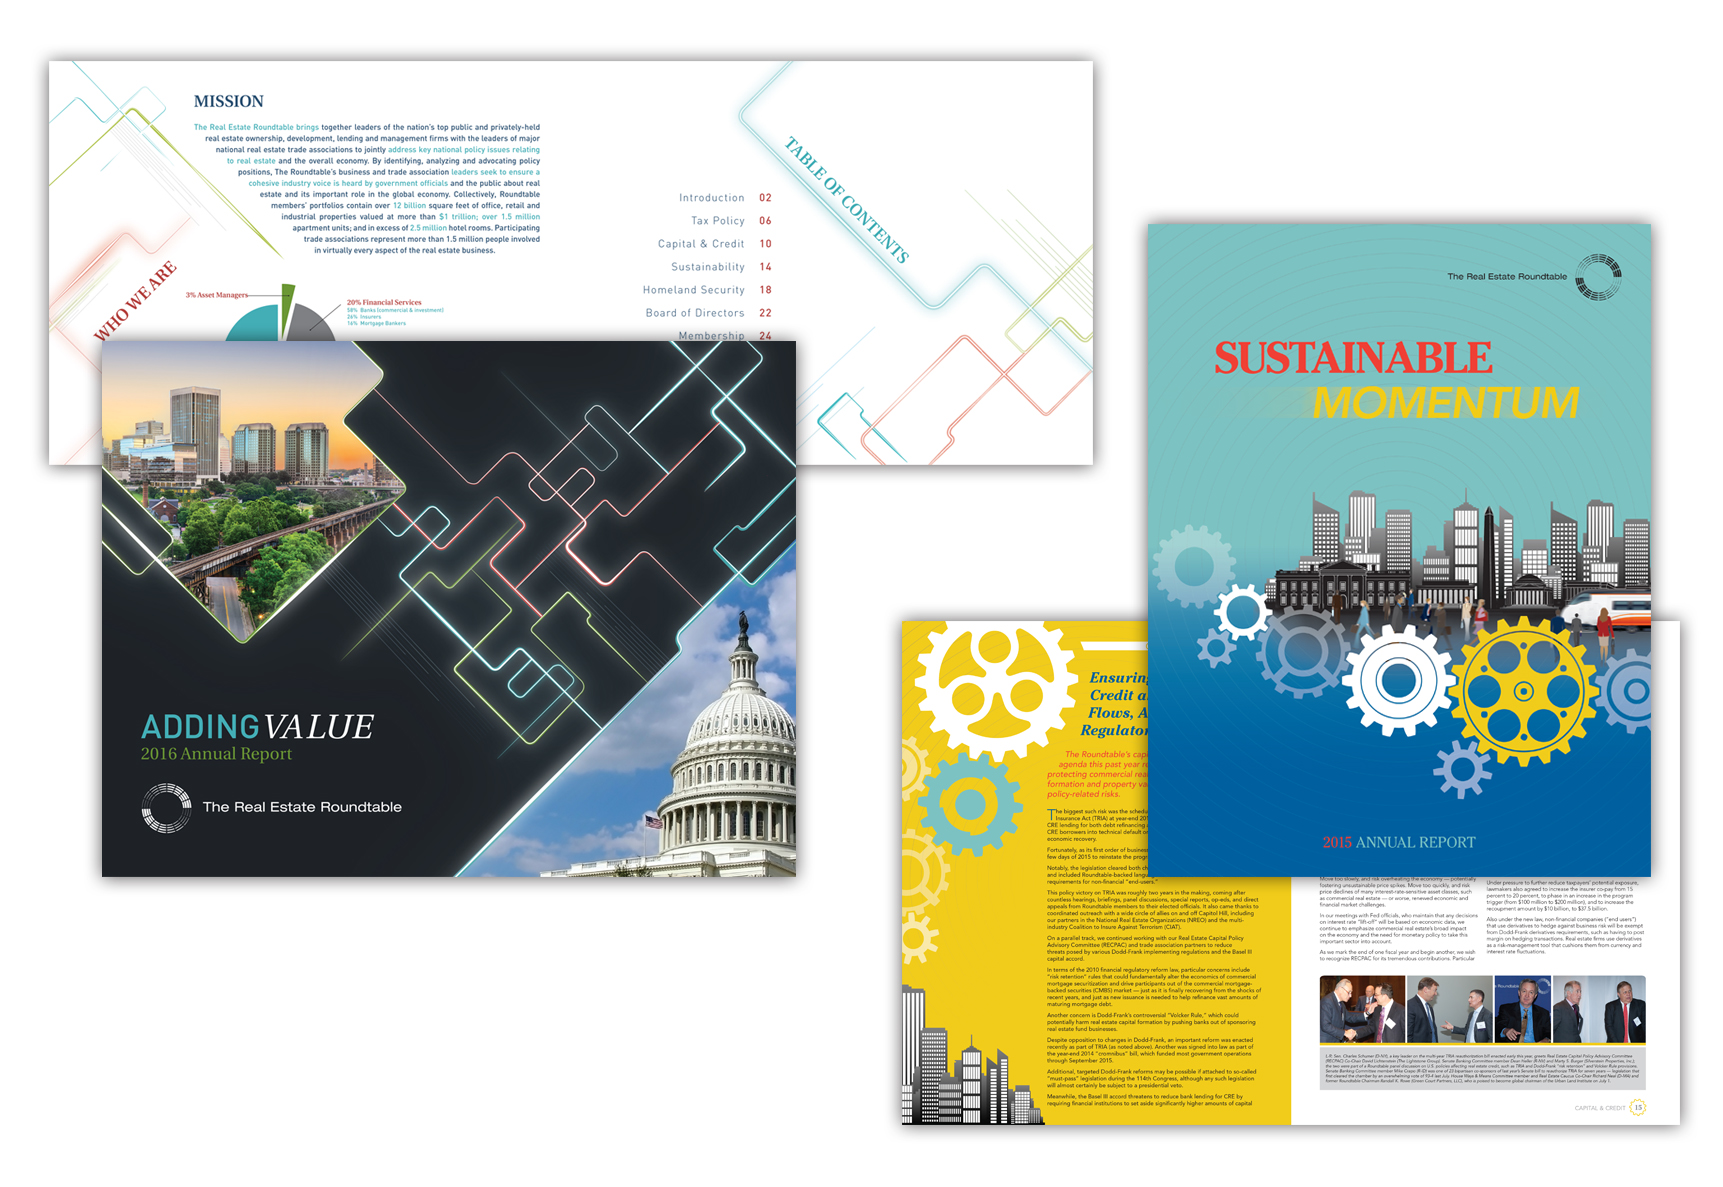 Vizual Integrated Marketing & Branding | The Real Estate Roundtable Annual Report